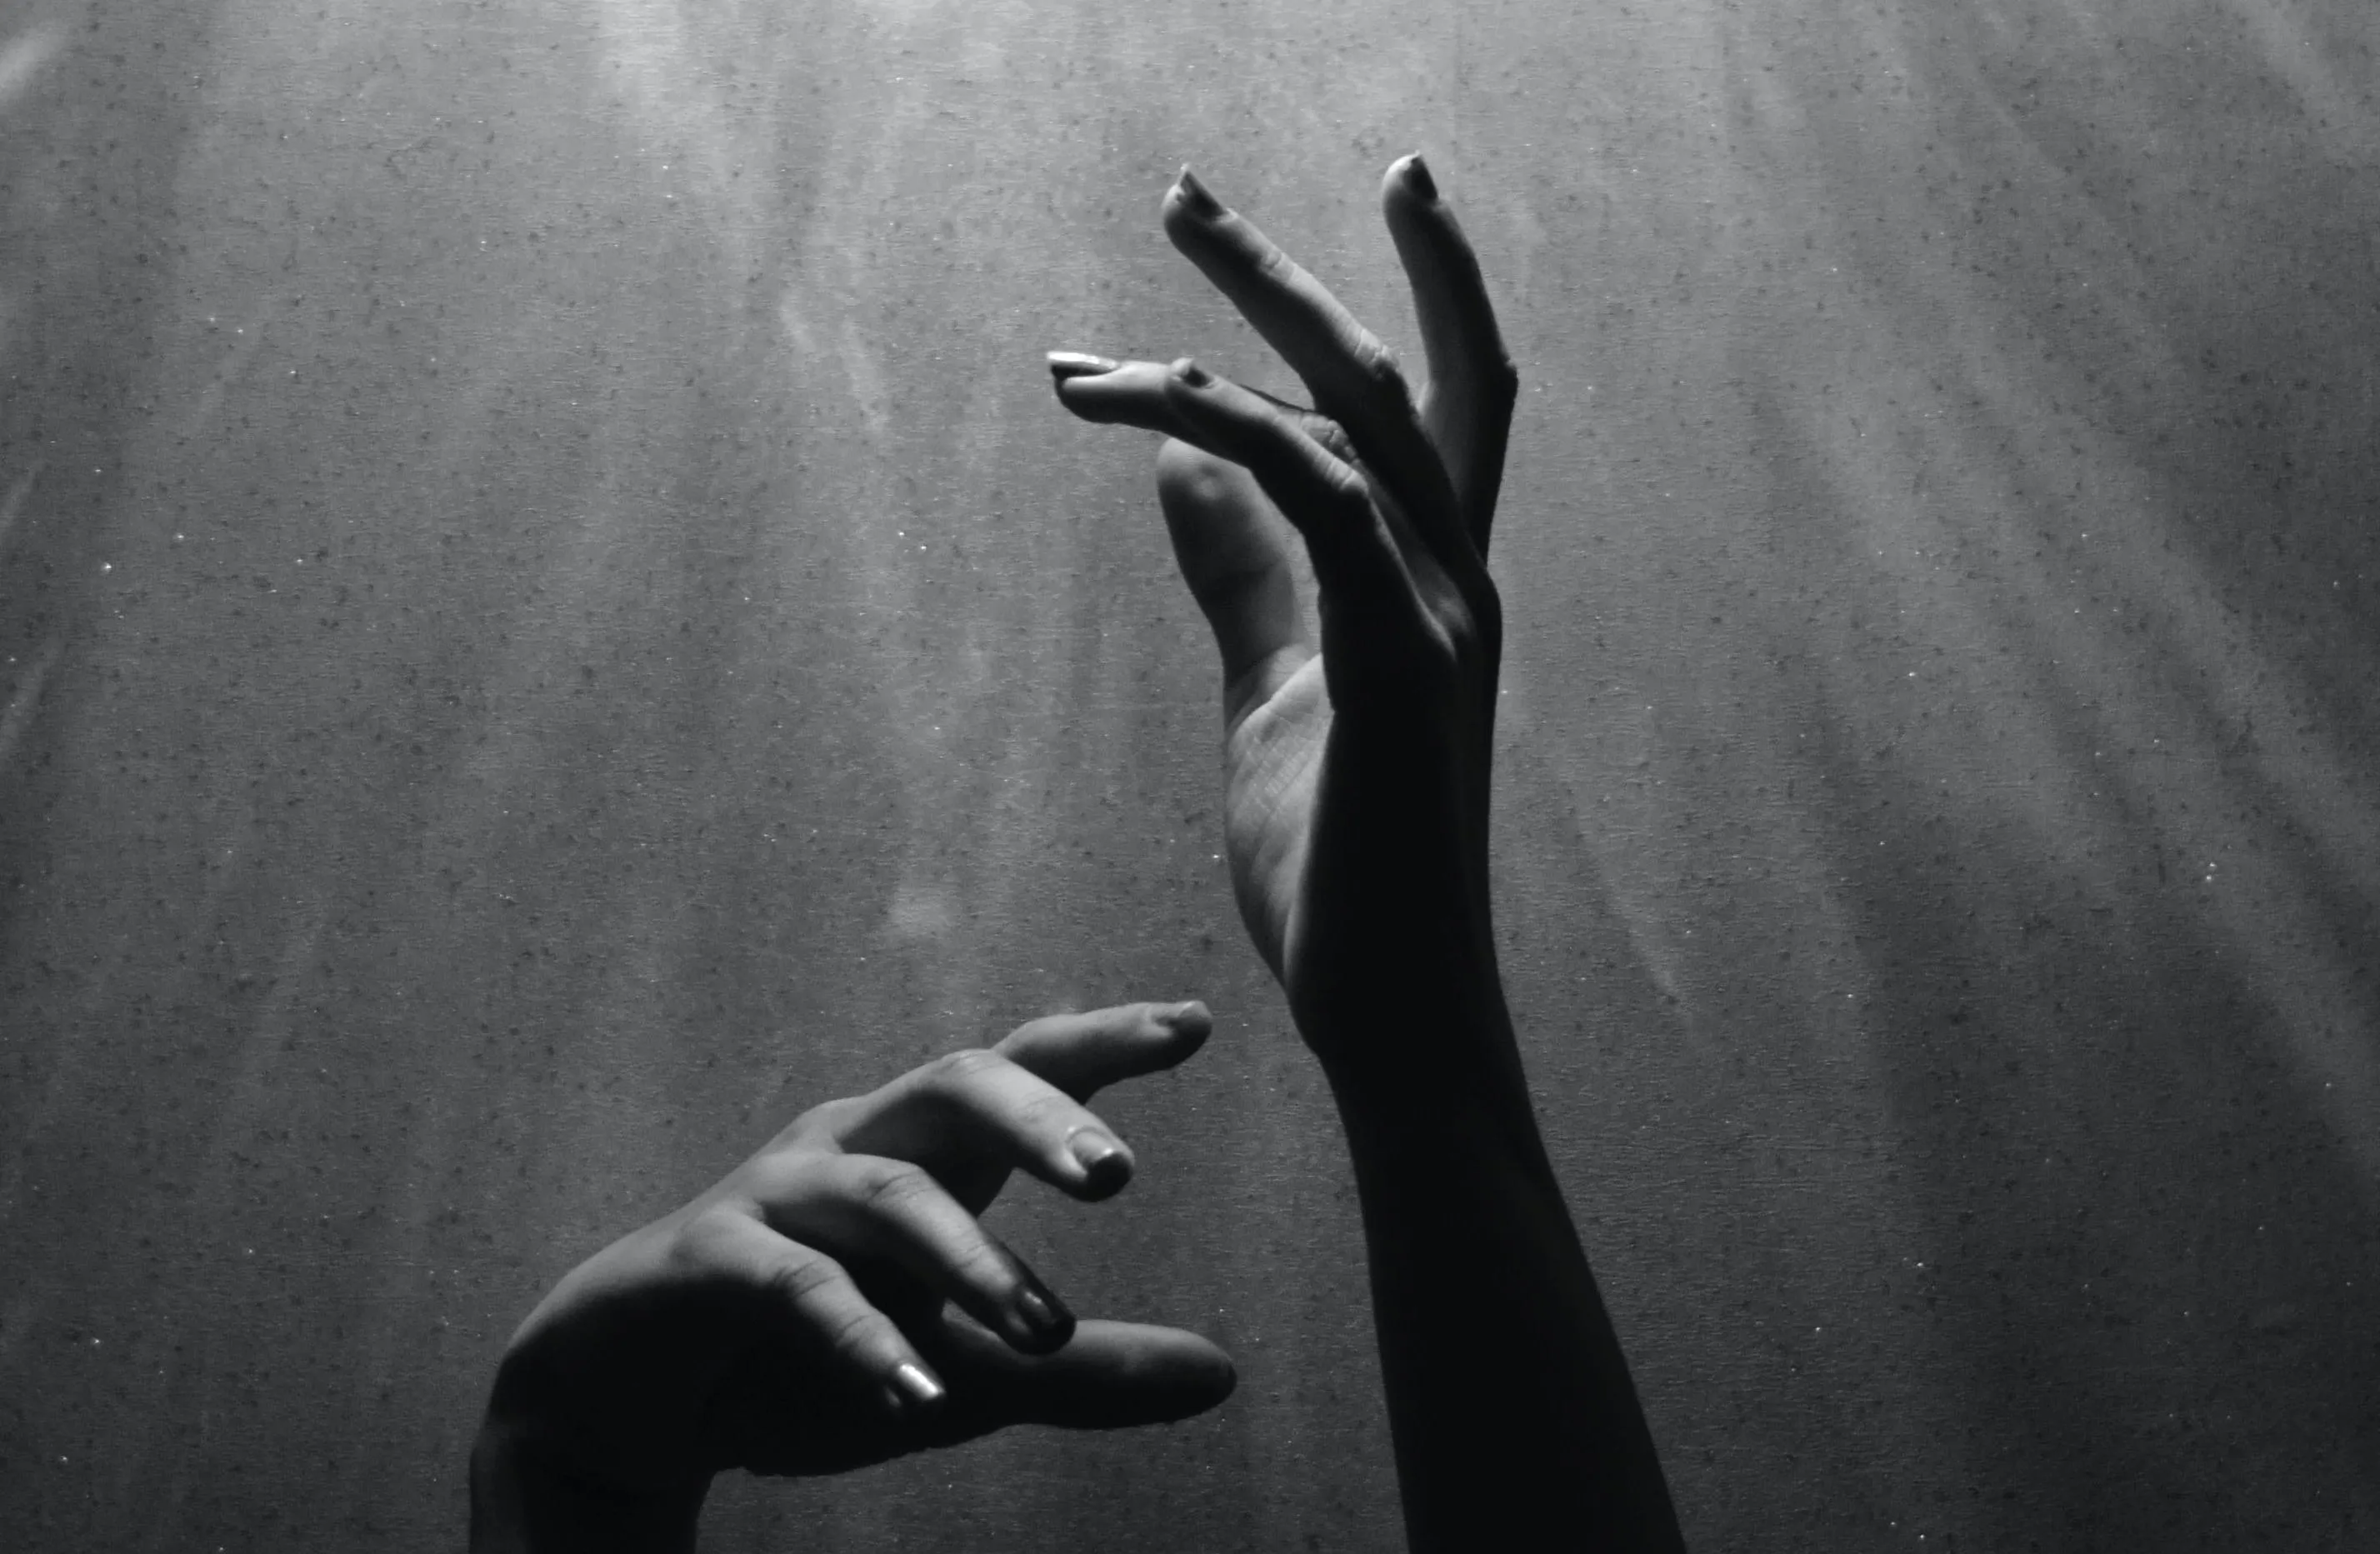 black and white image of two hands reaching for the light